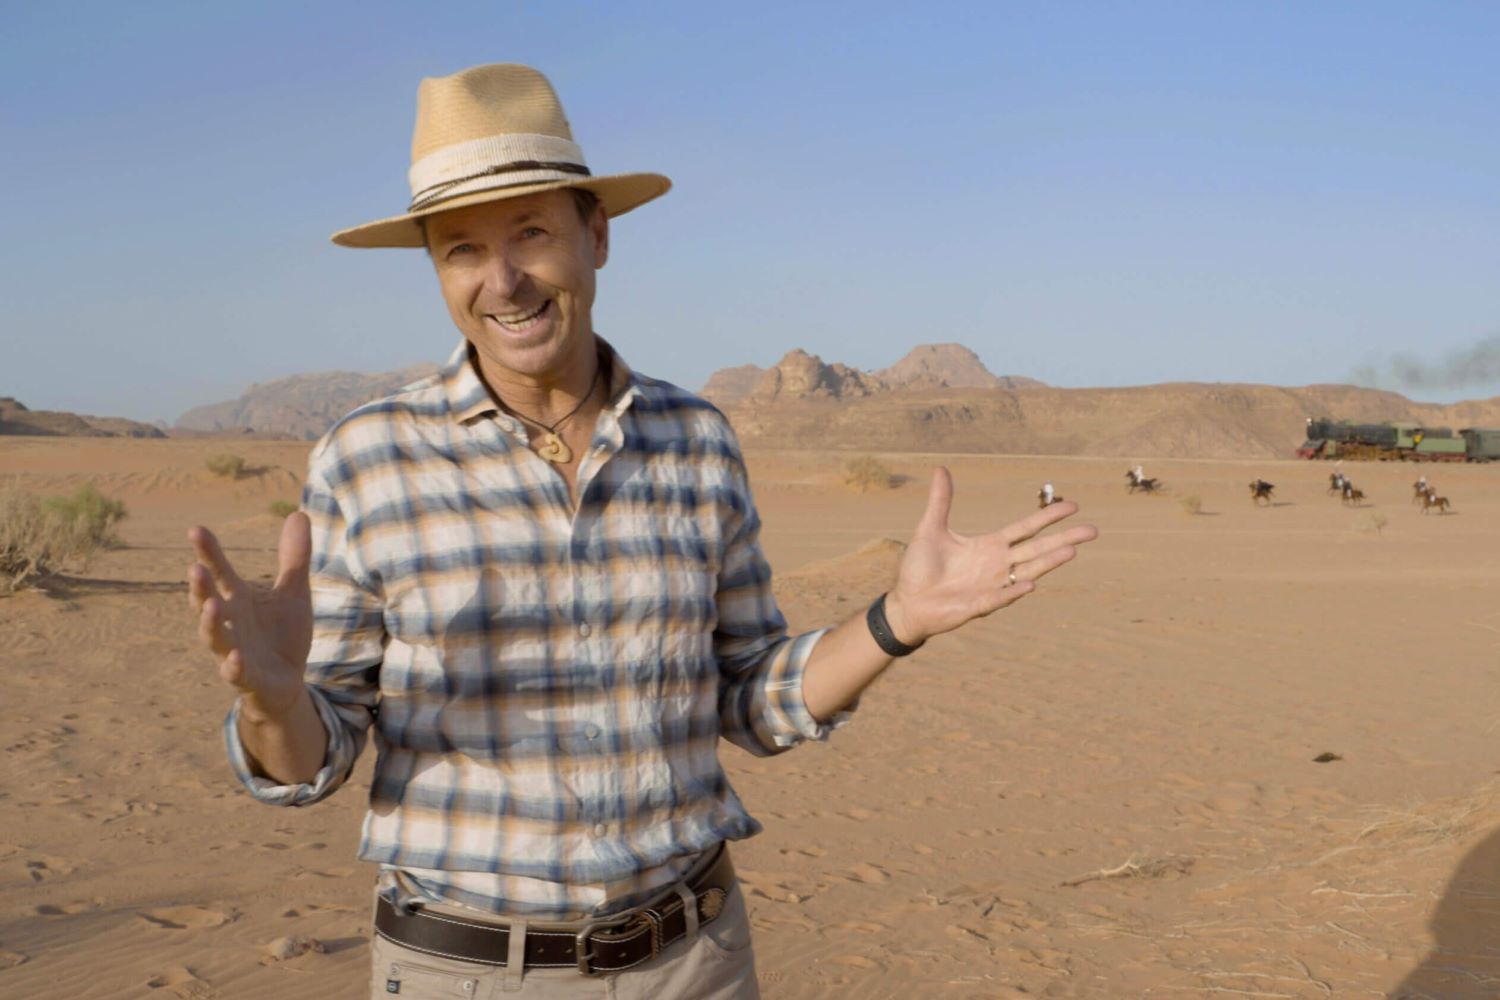 Phil Keoghan, the host of 'The Amazing Race' Season 35, appears in Jordan in season 34 wearing a blue, orange, and white plaid button-up shirt, tan pants, a brown belt, and a tan hat.